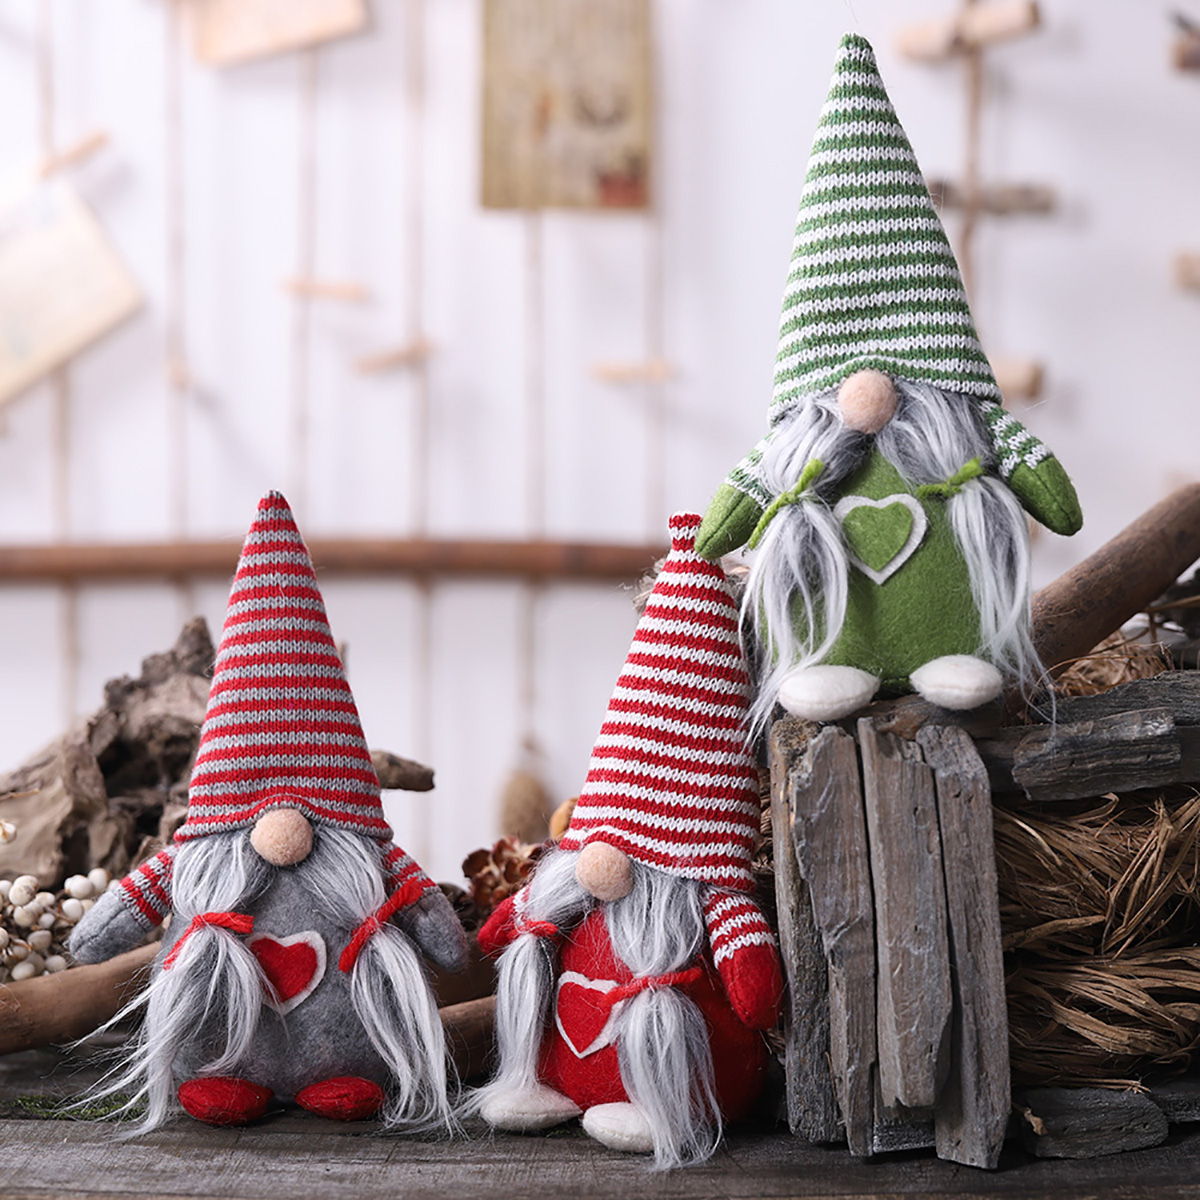 Non-Woven-Hat-With-Heart-Handmade-Gnome-Santa-Christmas-Figurines-Ornament-Holiday-Table-Decorations-1634099-6